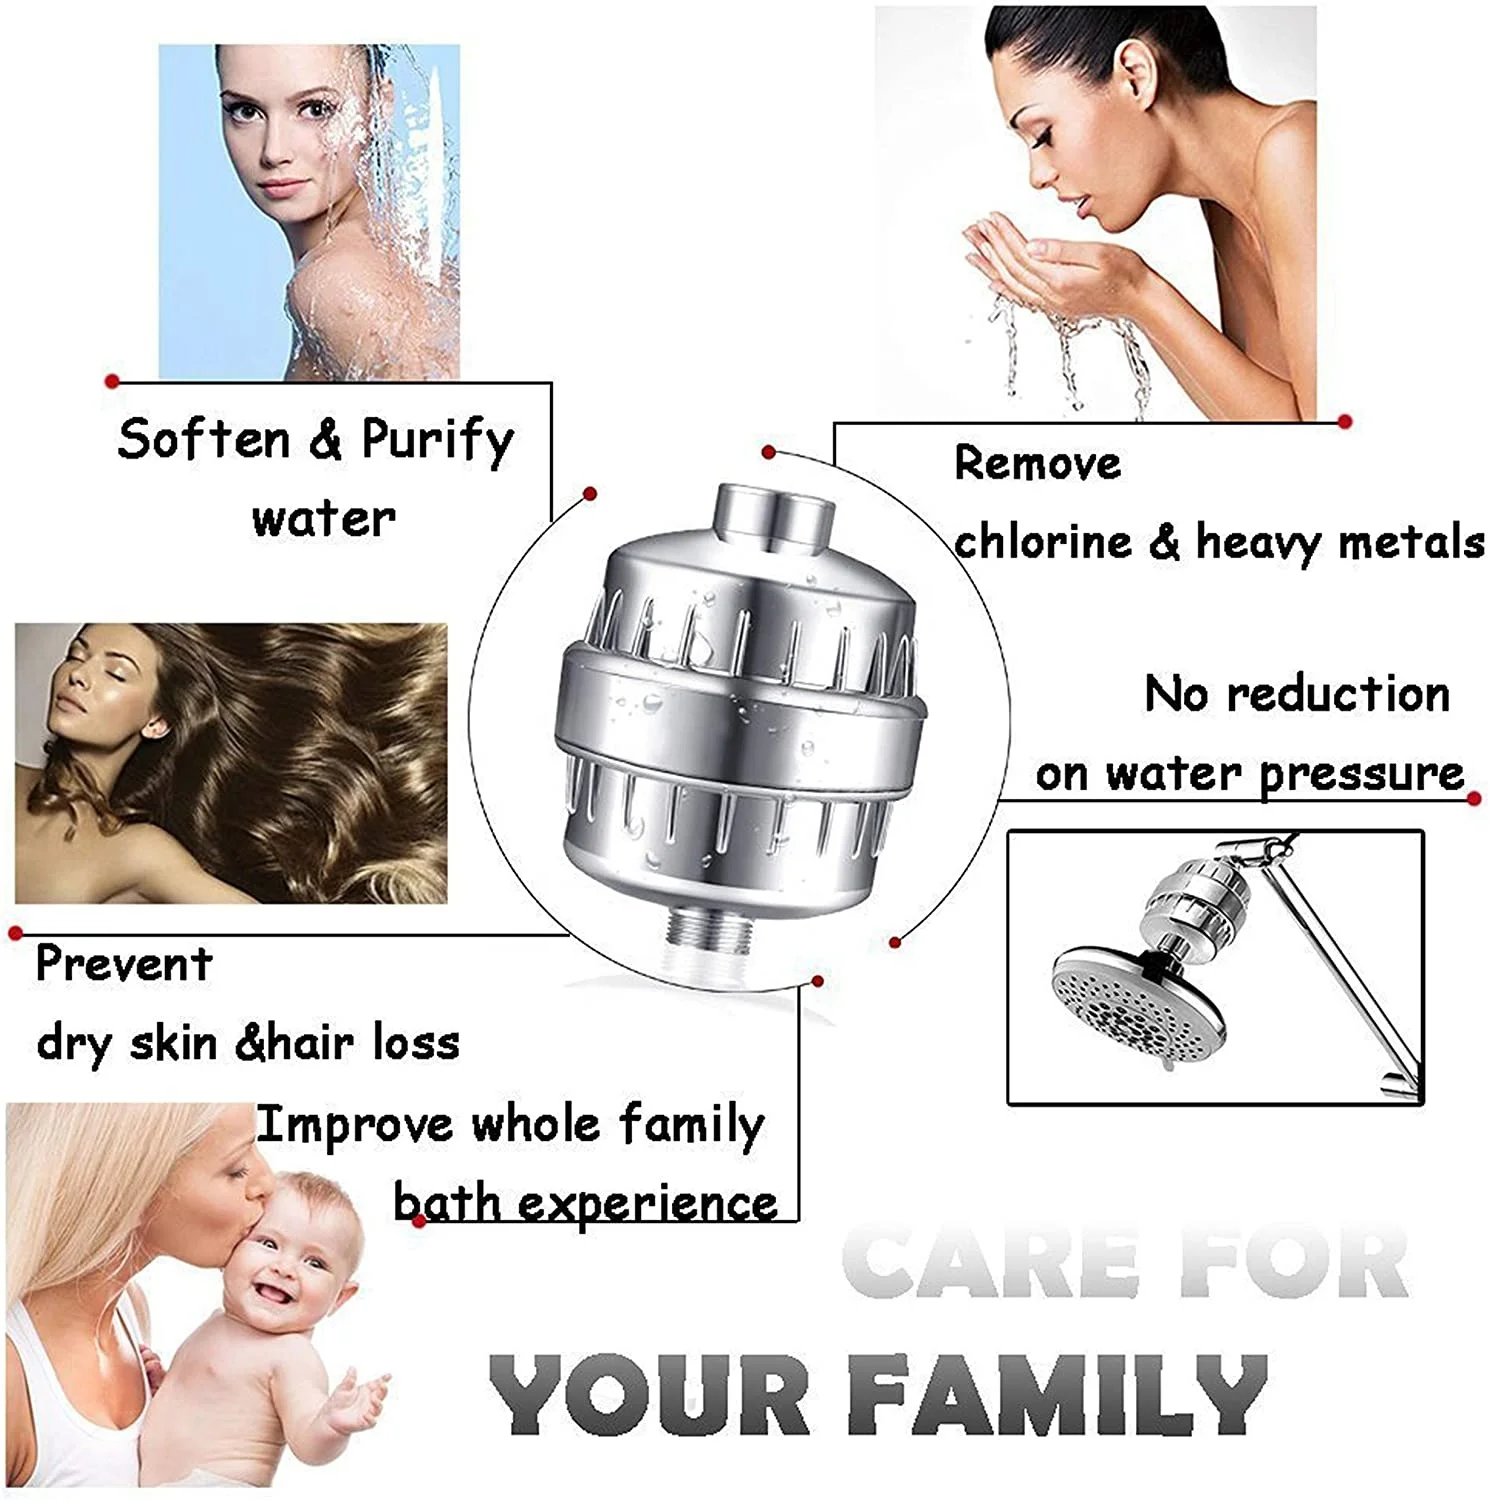 care for your family.jpg